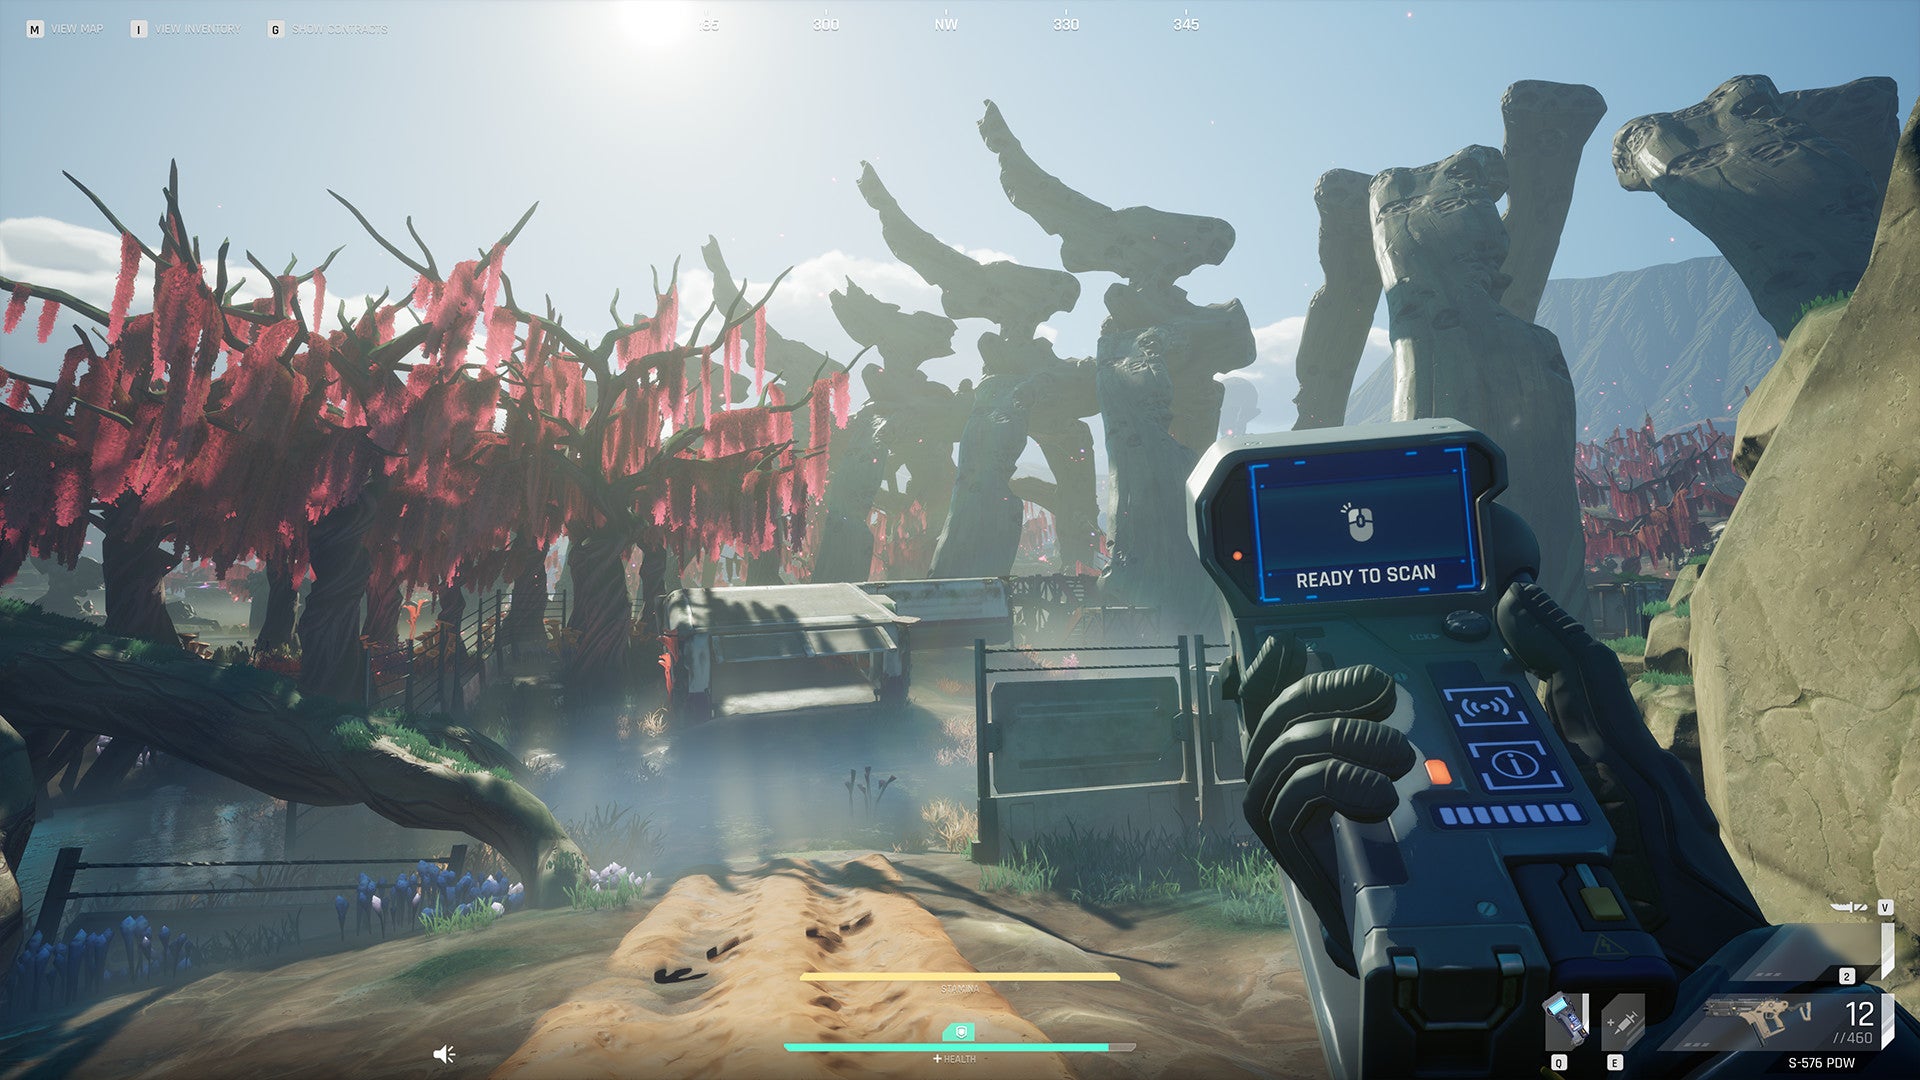 A screenshot from The Cycle which shows a player hold a mineral scanner in the air.